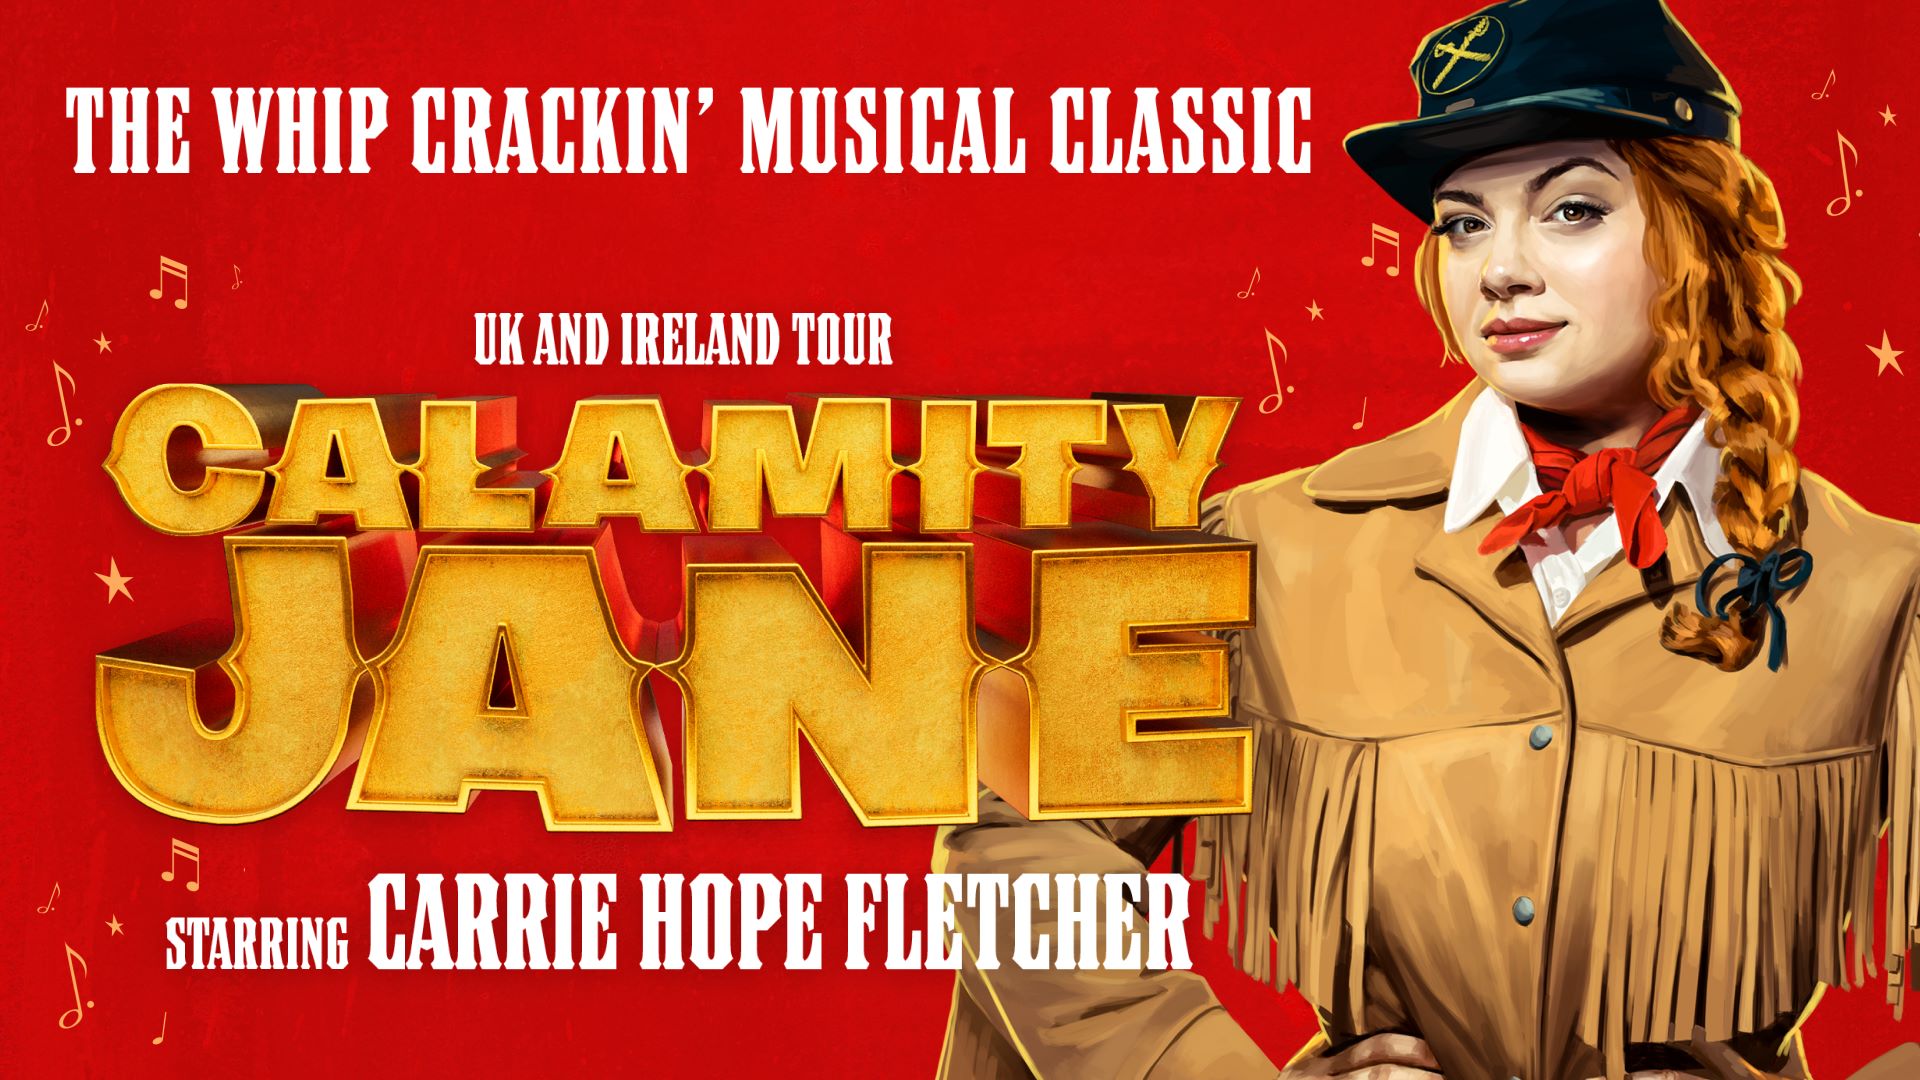 Calamity Jane tour poster starring Carrie Hope Fletcher